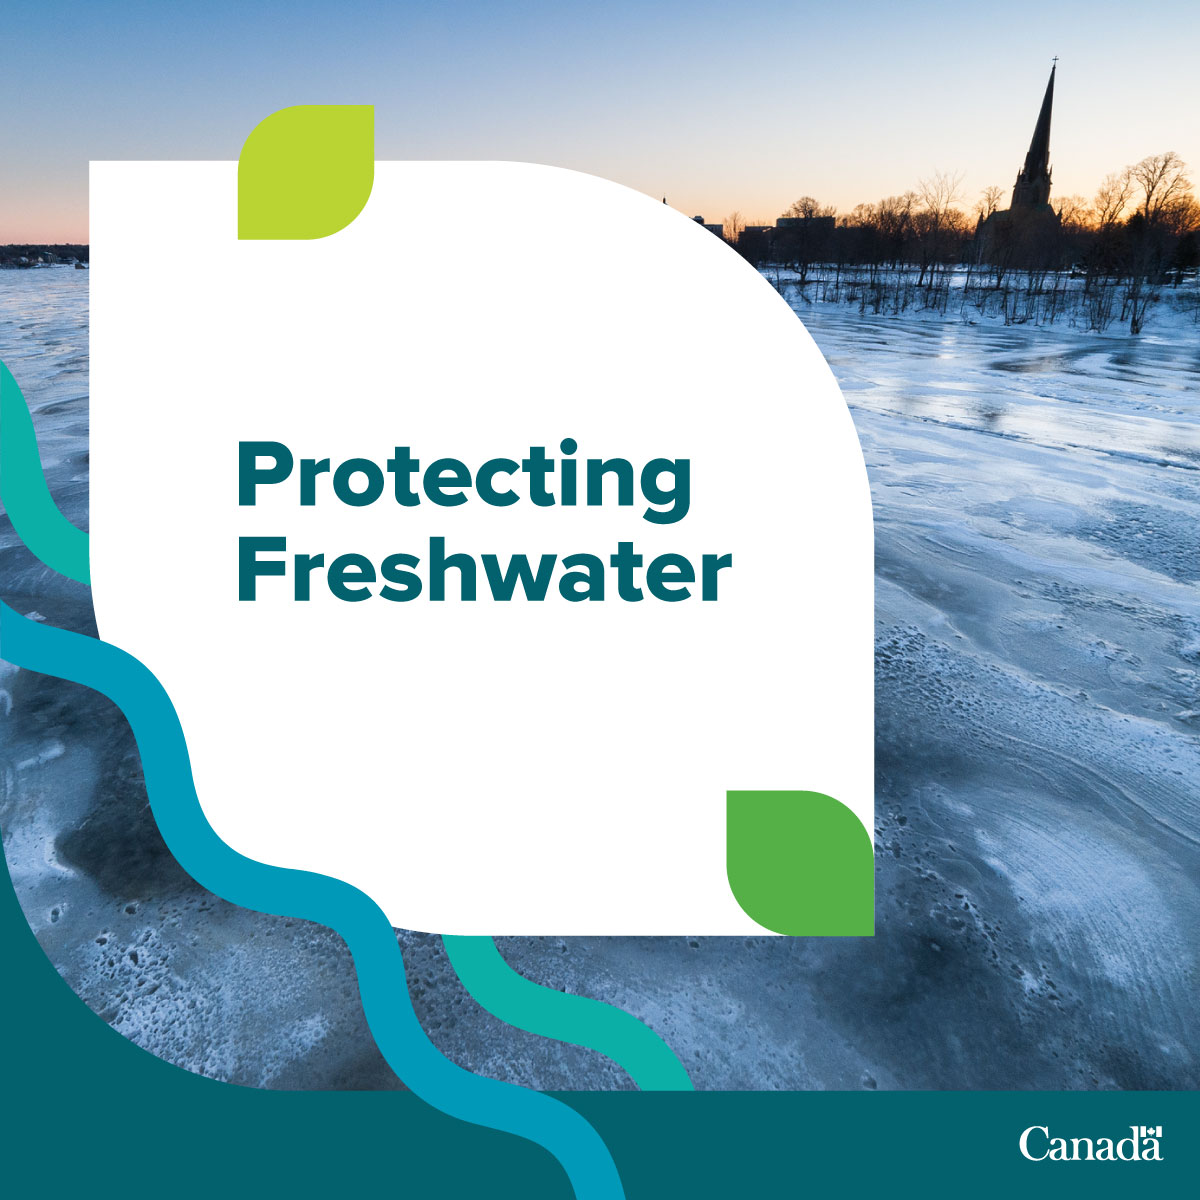 📢 We are accepting applications for projects supporting the #Freshwater Action Plan in: ✅ Lake Simcoe ✅ Wolastoq/Saint John River Plus, applications for projects across Canada can be submitted through #EcoAction! Learn more and apply by March 15: ow.ly/iCG250QtgjG